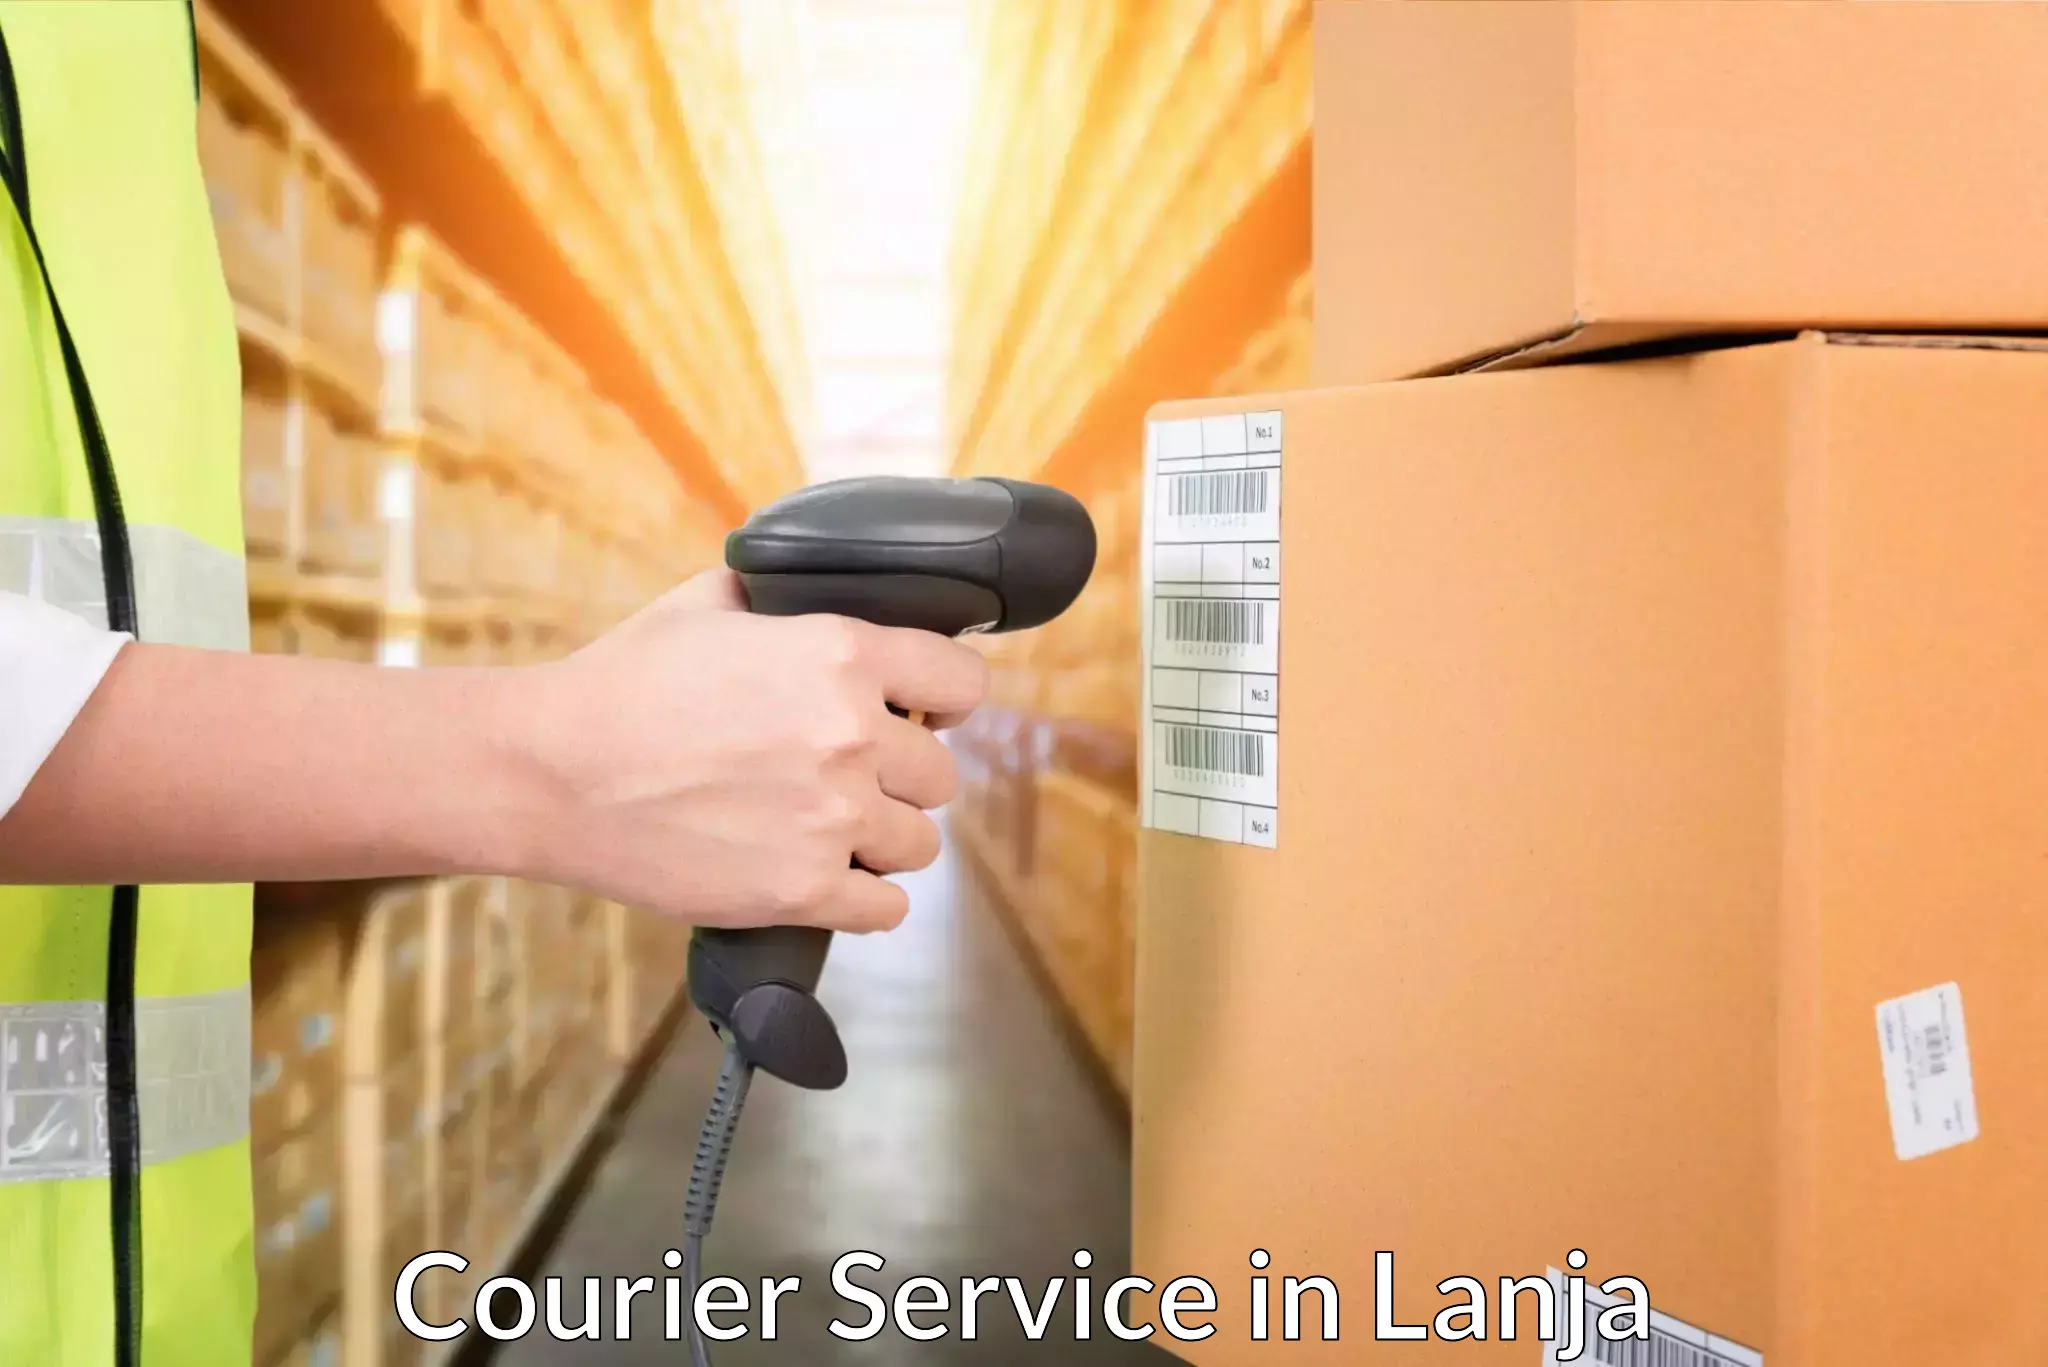 User-friendly delivery service in Lanja